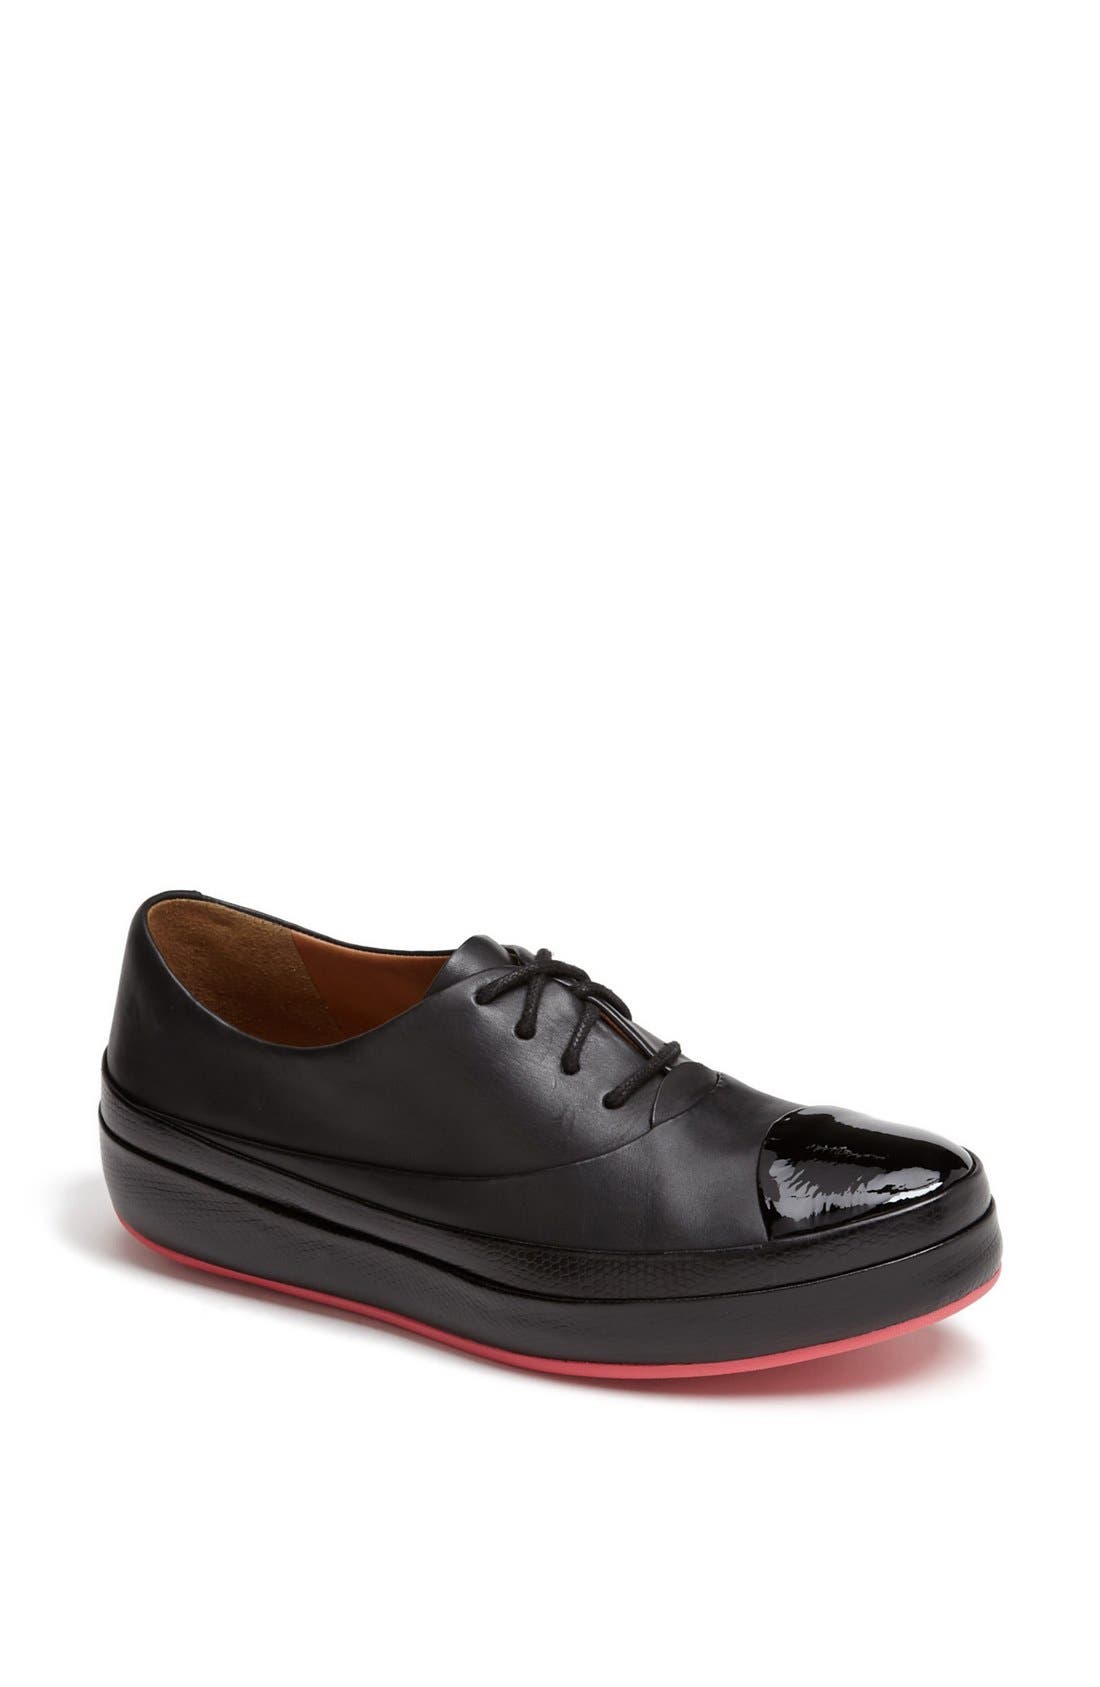 FitFlop 'Uno™' Oxford Flat | Nordstrom